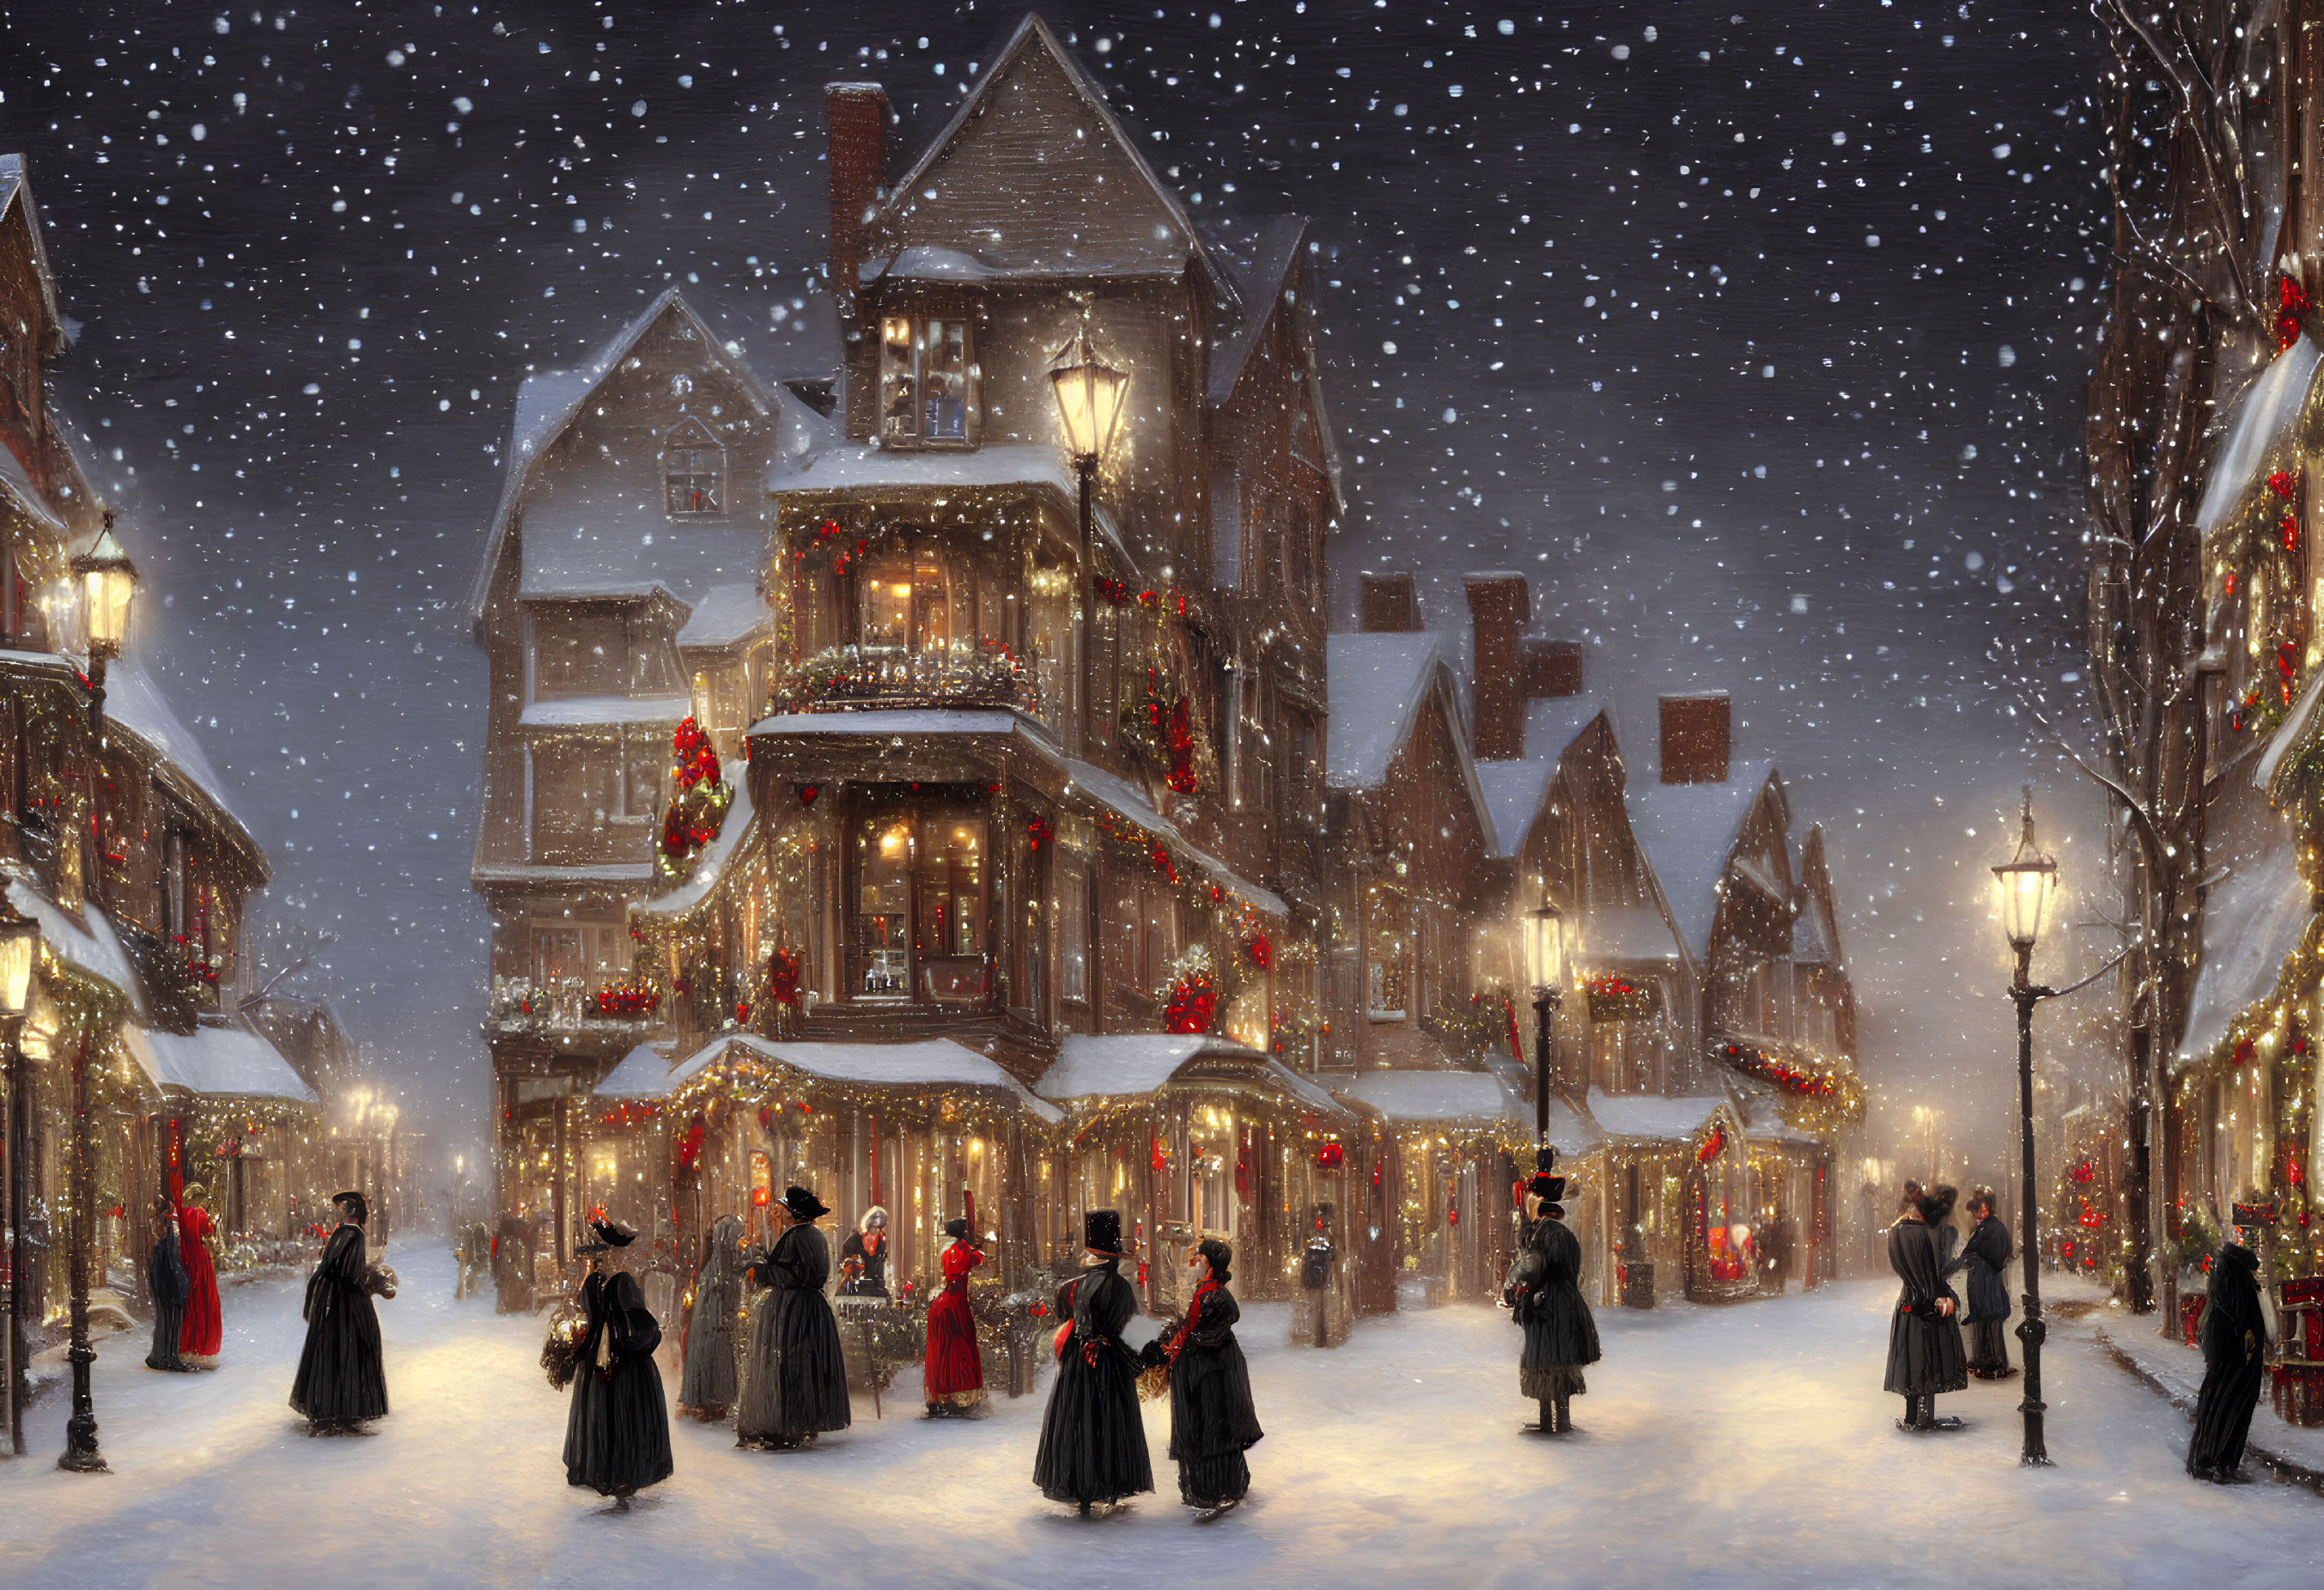 Victorian-style buildings with Christmas decorations, period-clad people in snowy night scene.